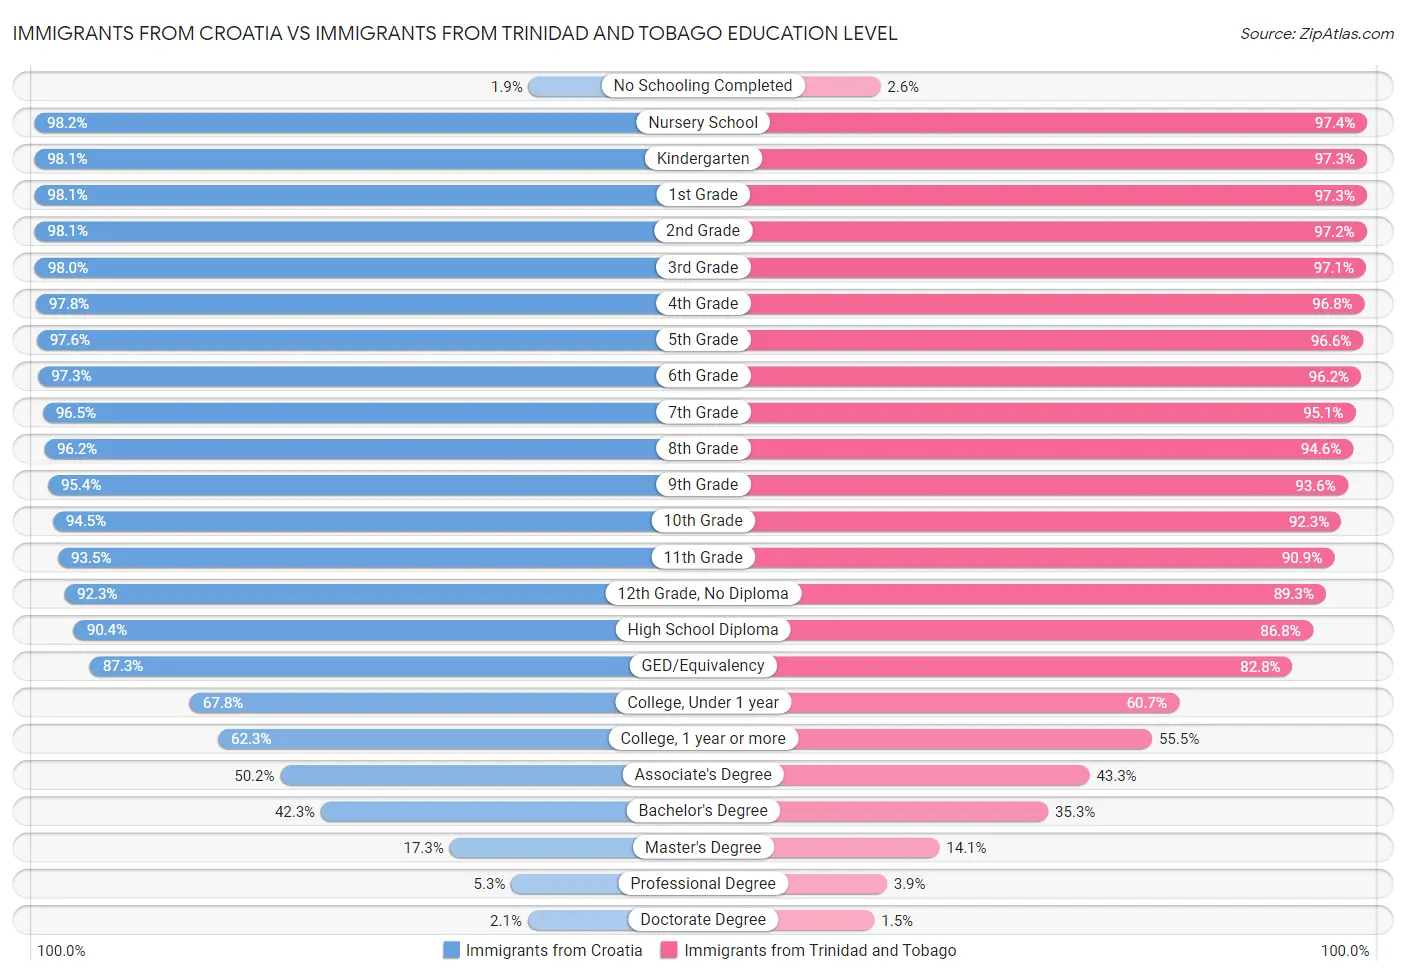 Immigrants from Croatia vs Immigrants from Trinidad and Tobago Education Level